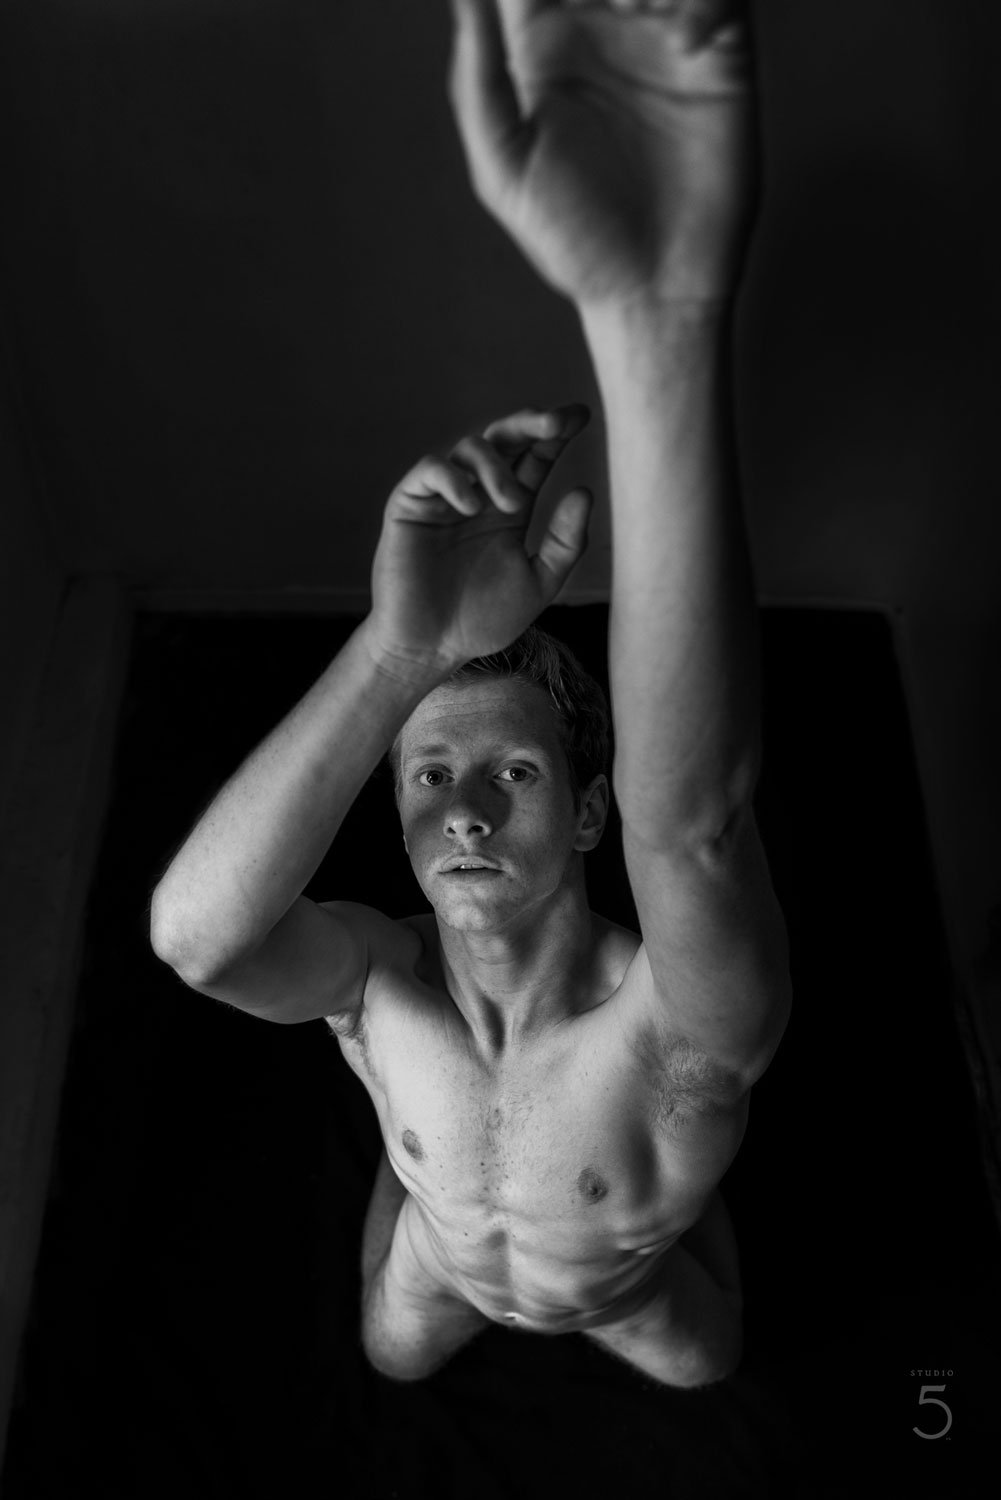 Black and white male nude, photo by Studio5h, nude photoshoot, photoshoot de nu, nu artistique, artistic nude, professional artist, respectful 